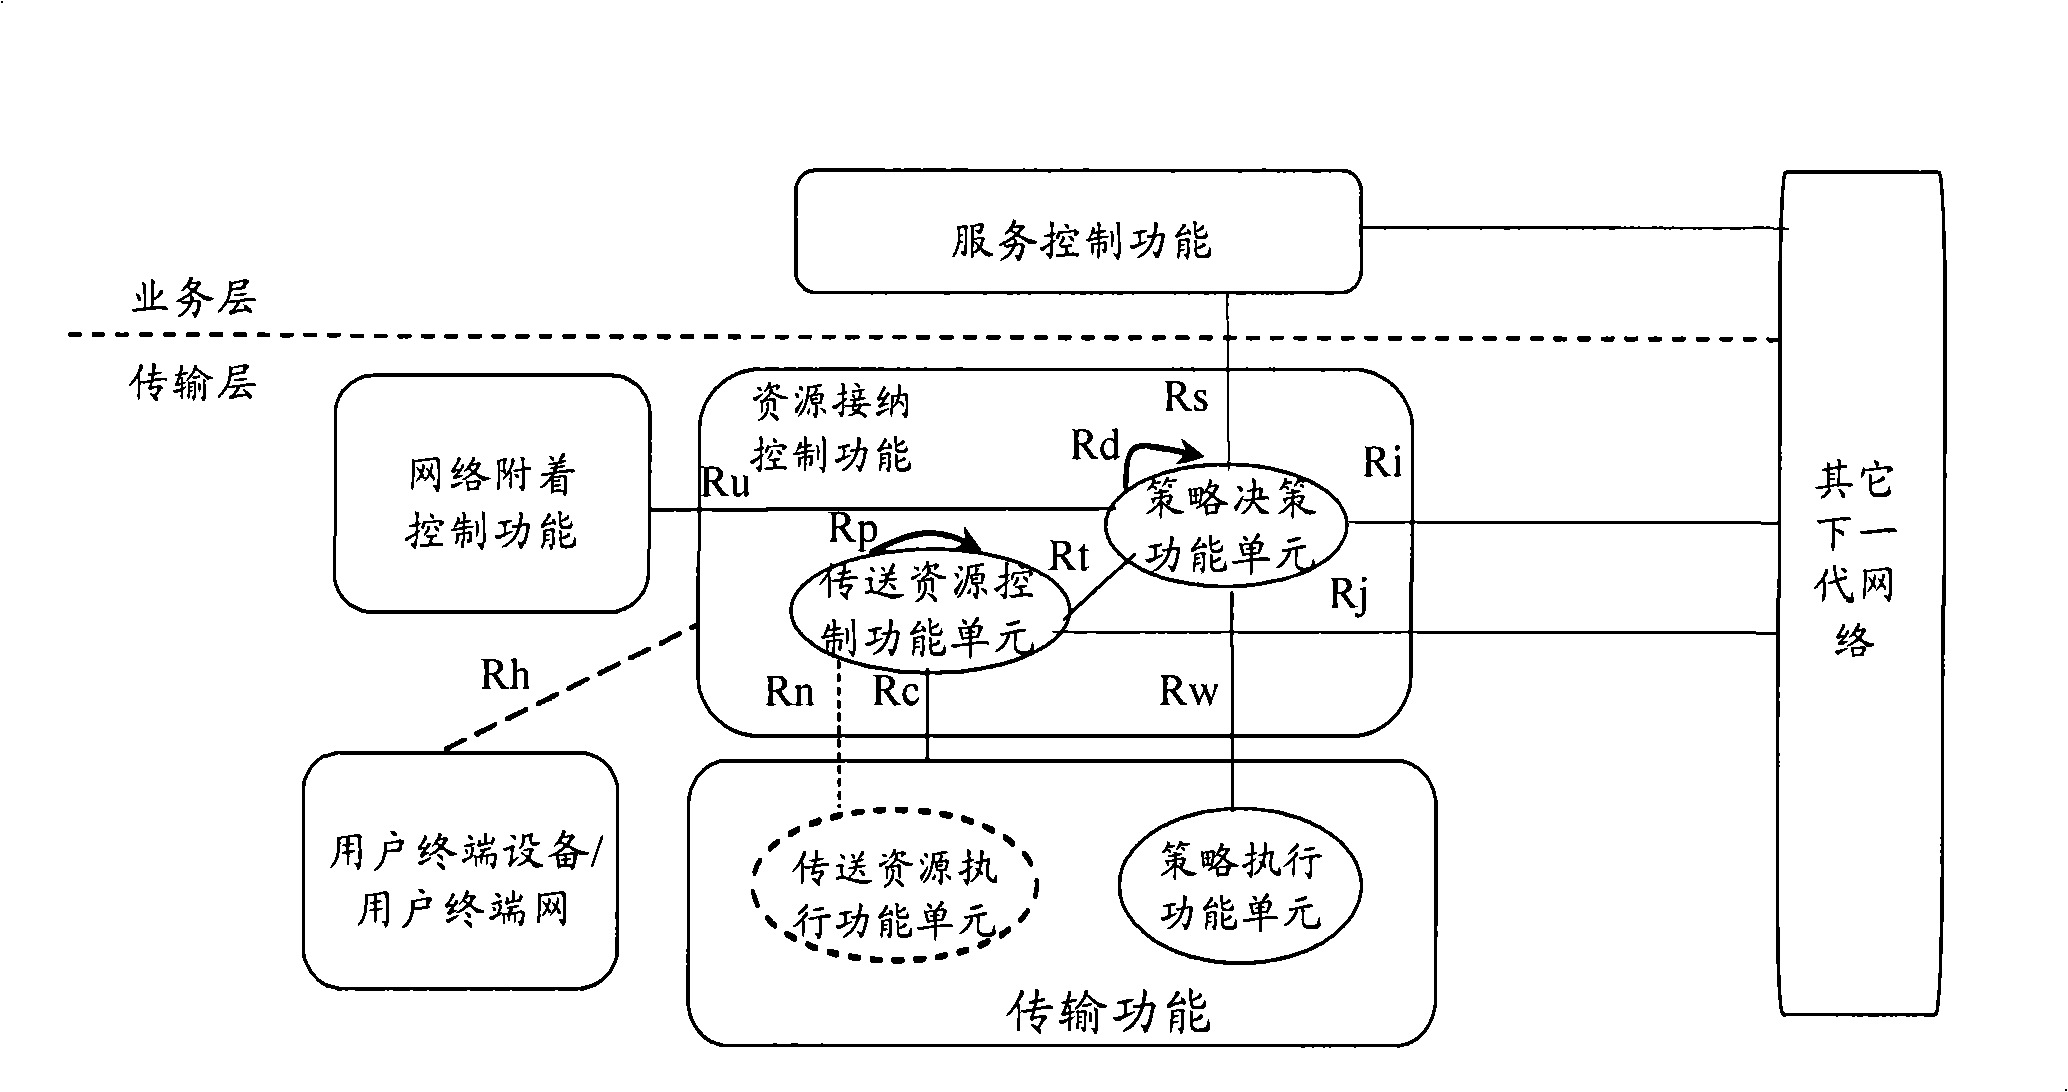 Distribution method of tunnel resource in multiple protocol label switch/traffic engineering